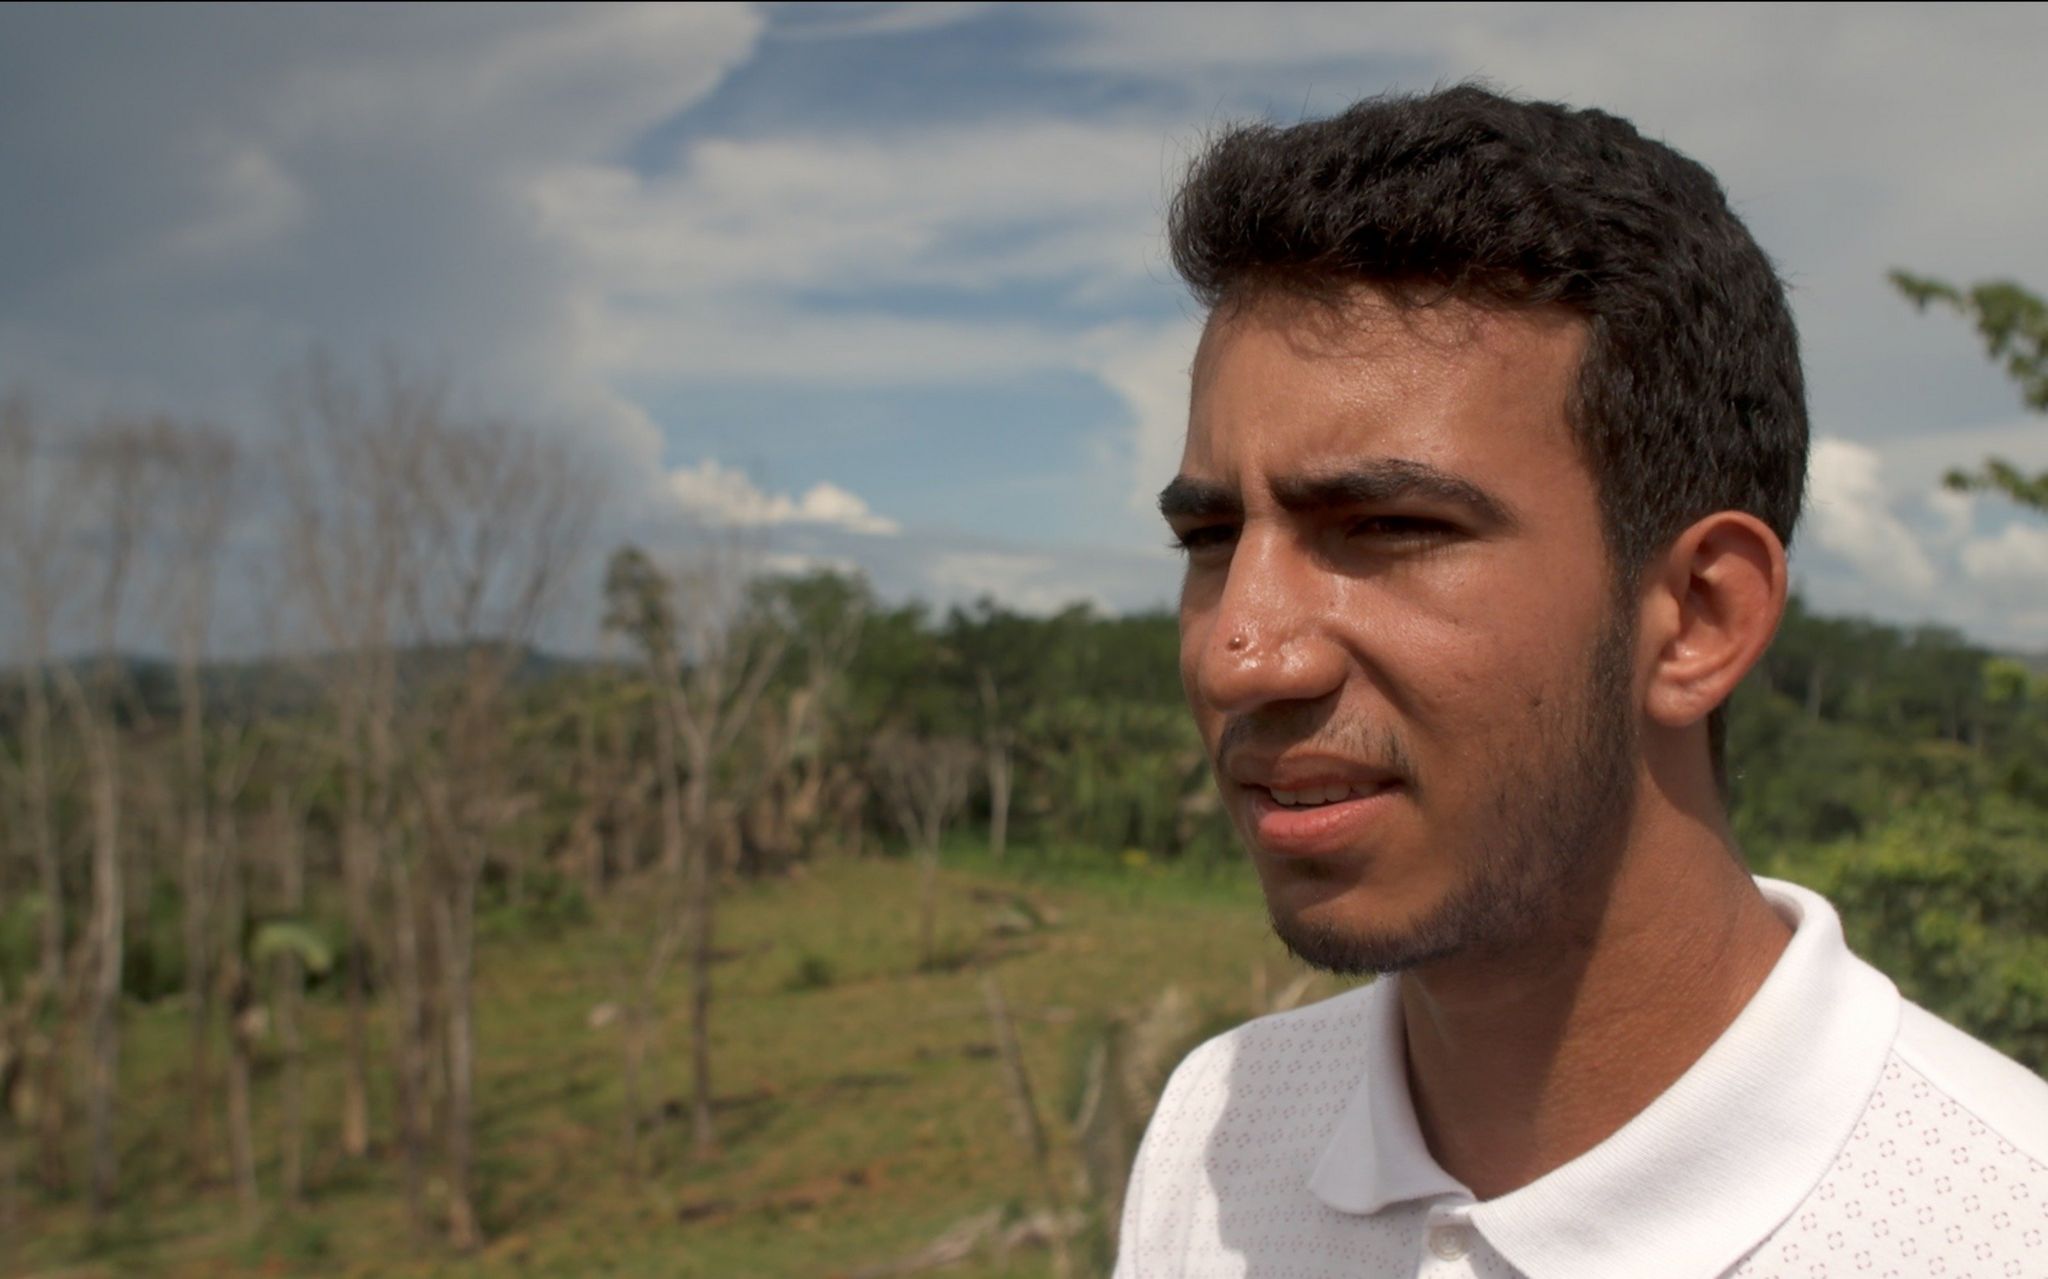 Gustavo's family farm was hit by an illegal fire last August